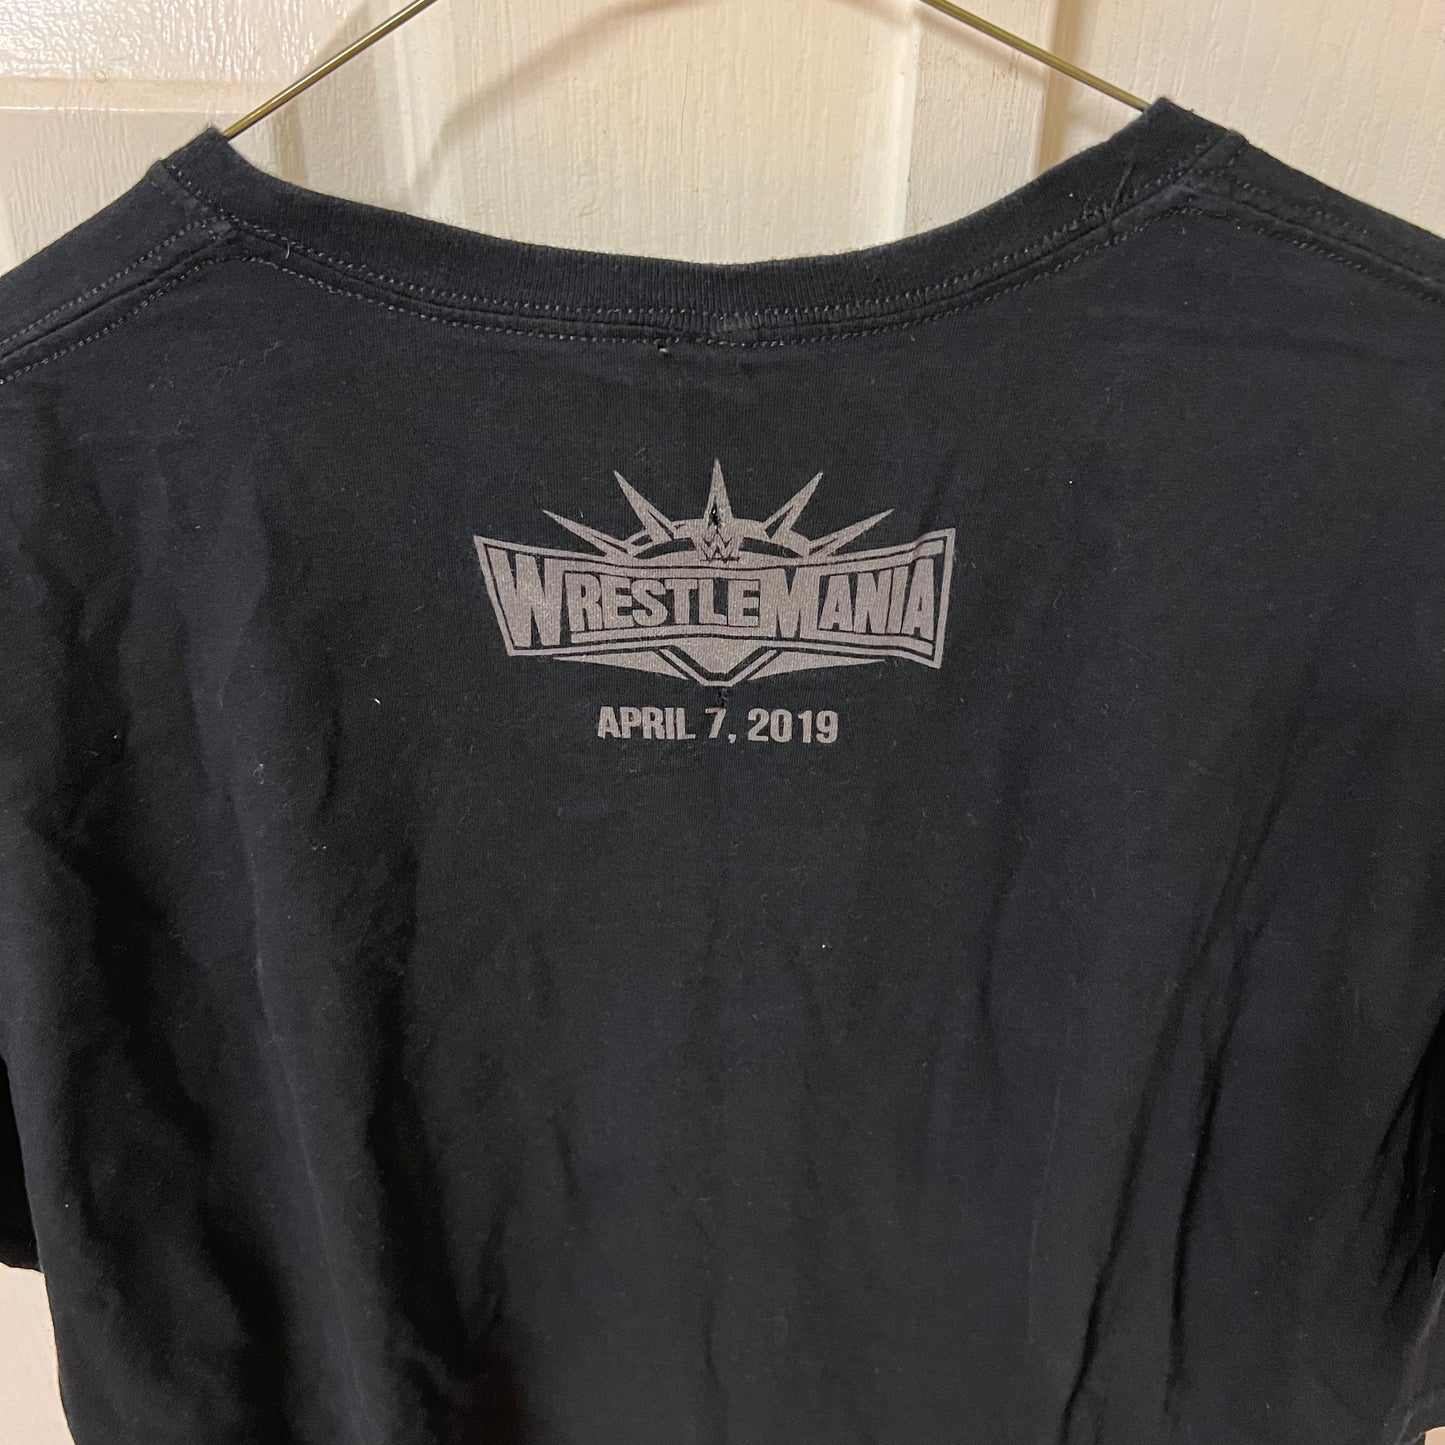 WrestleMania 35 - Large Size - Official WWE Shirt